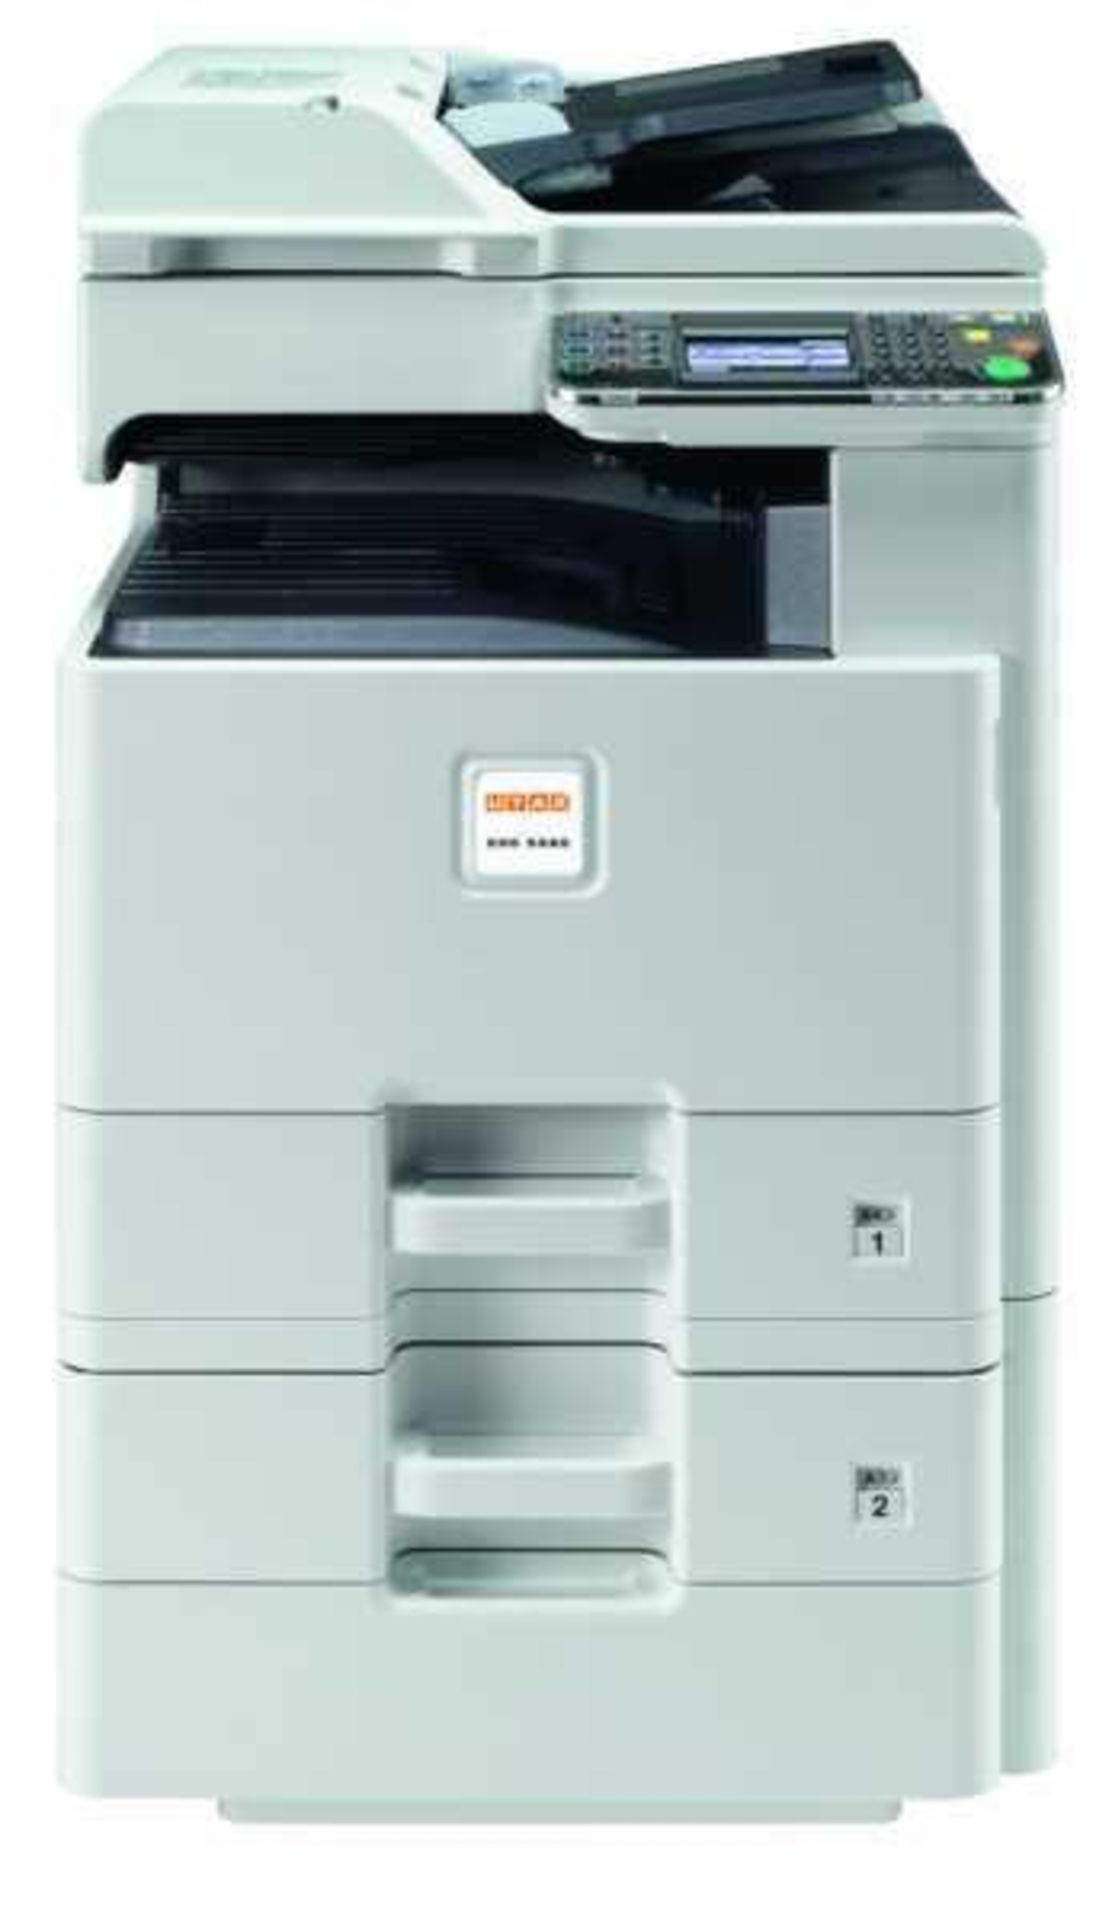 RRP £2500 Utax Cdc 5520 Colour Copier, 20 Pages Per Minute, Print, Copy And Scan With Touch Screen A - Image 2 of 2